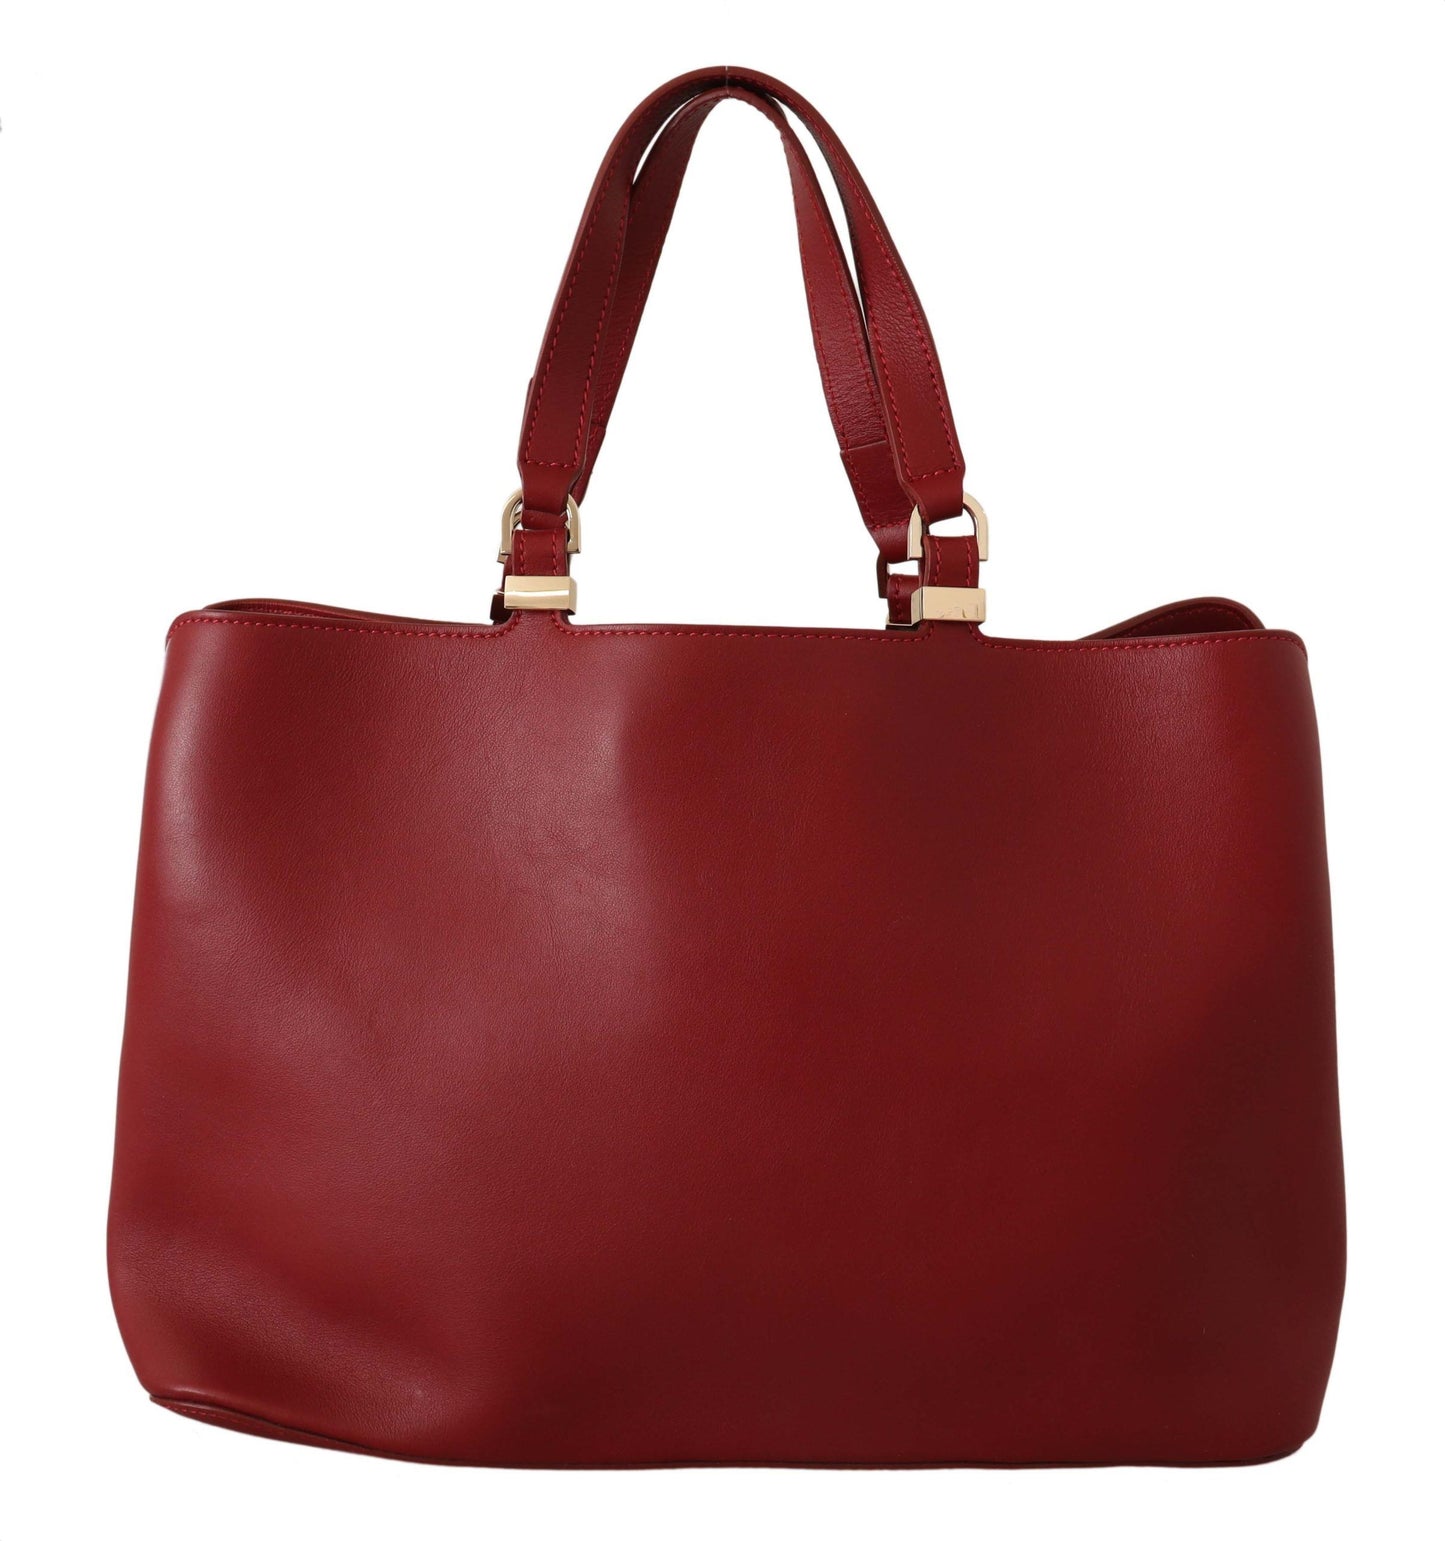 Elegant Red Leather Handbag with Gold Accents